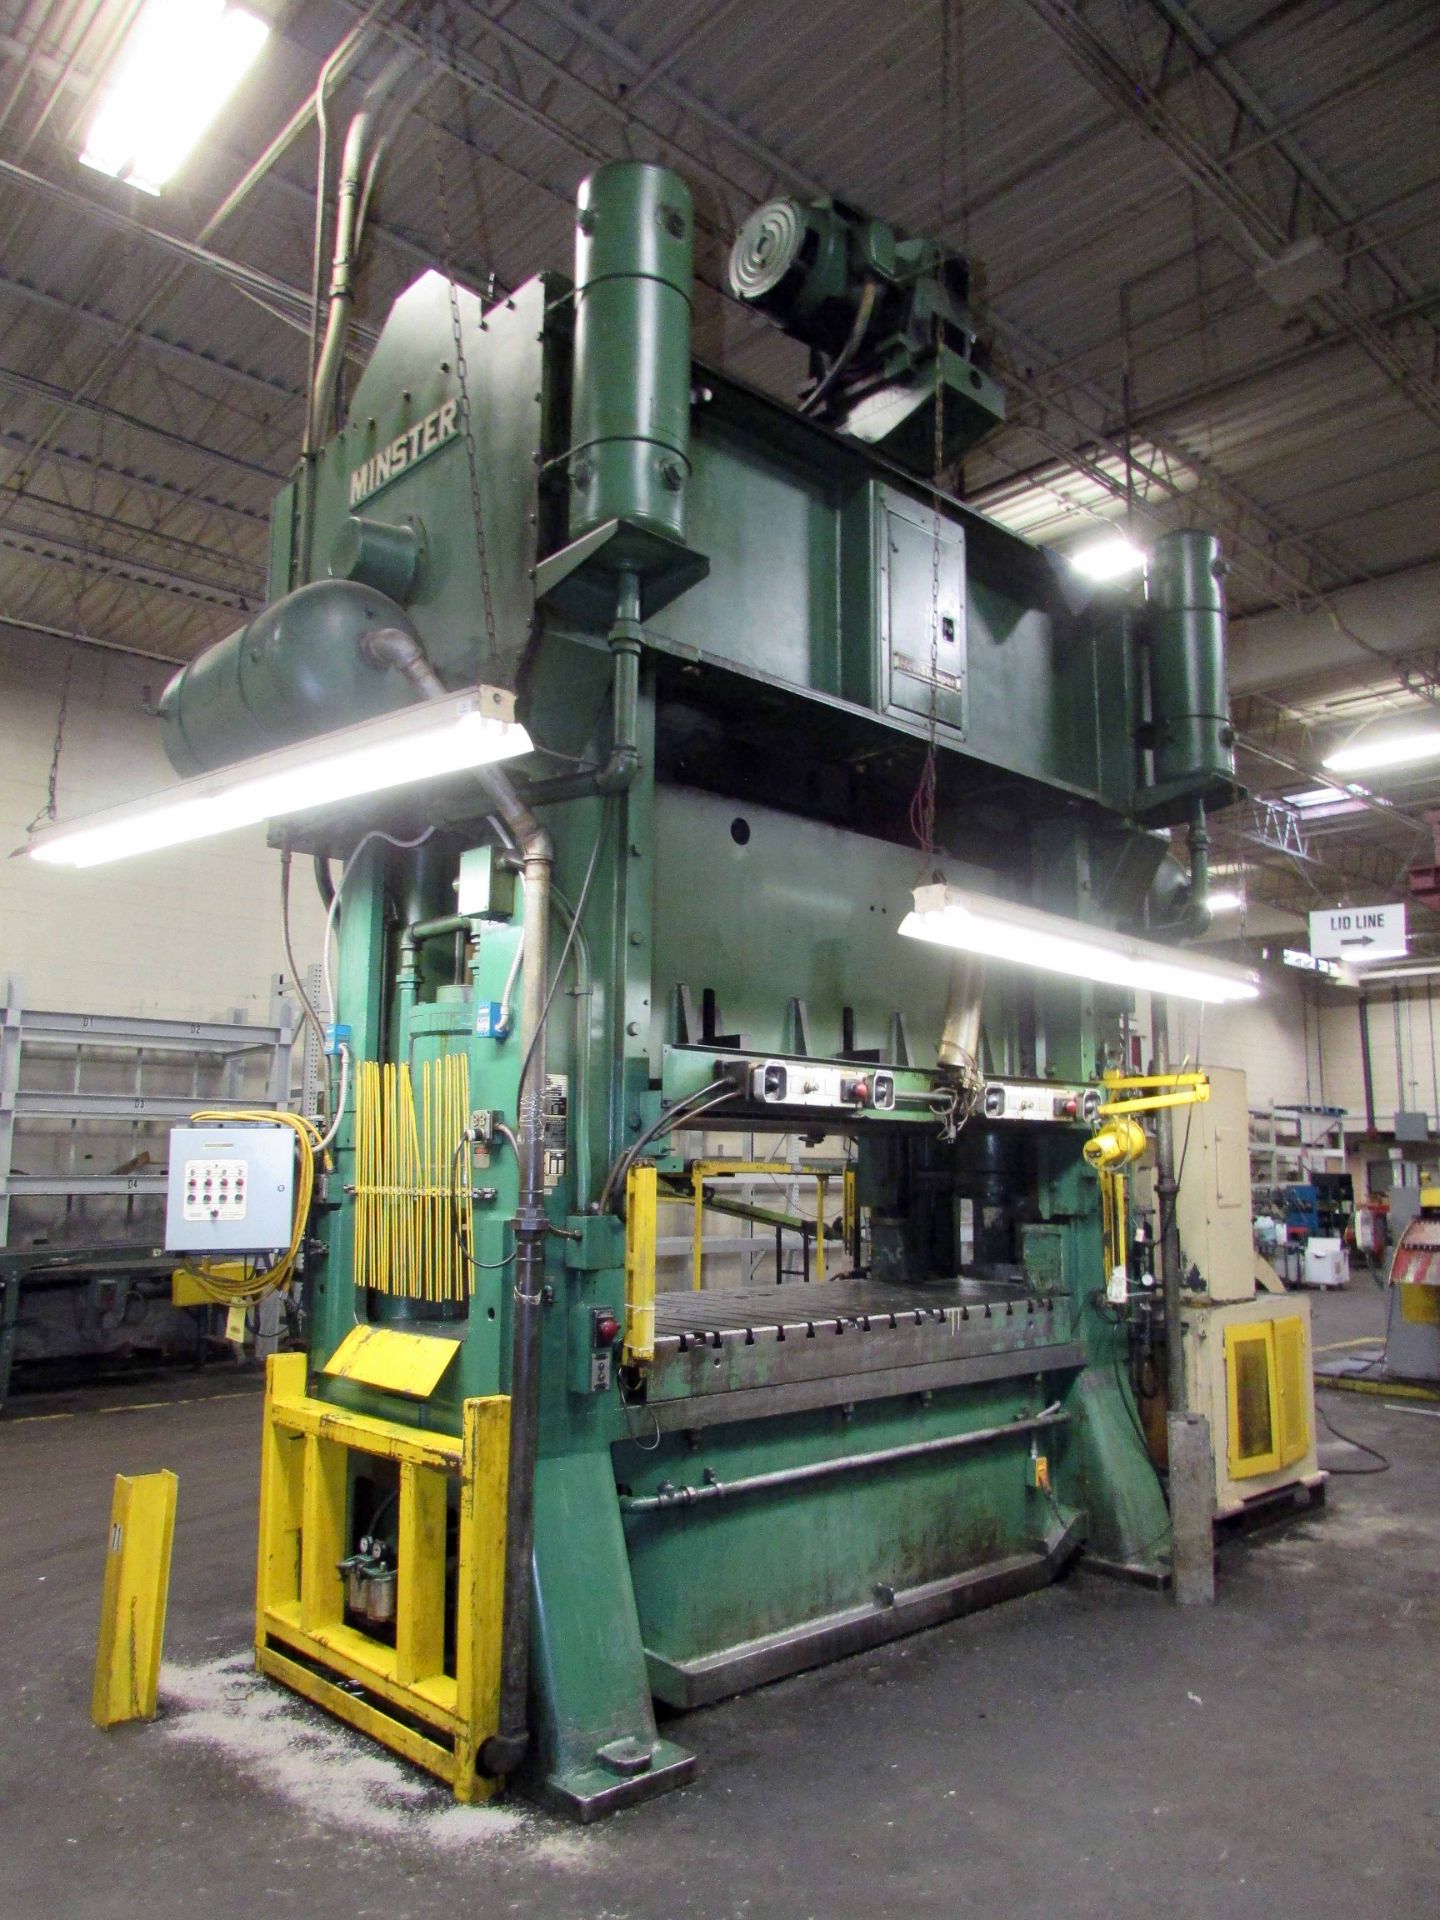 STRAIGHT SIDE 2-POINT ECCENTRIC GEARED PRESS, MINSTER 300 T. CAP. MDL. E2-300-96-48 “HEVI-STAMPER” - Image 7 of 23